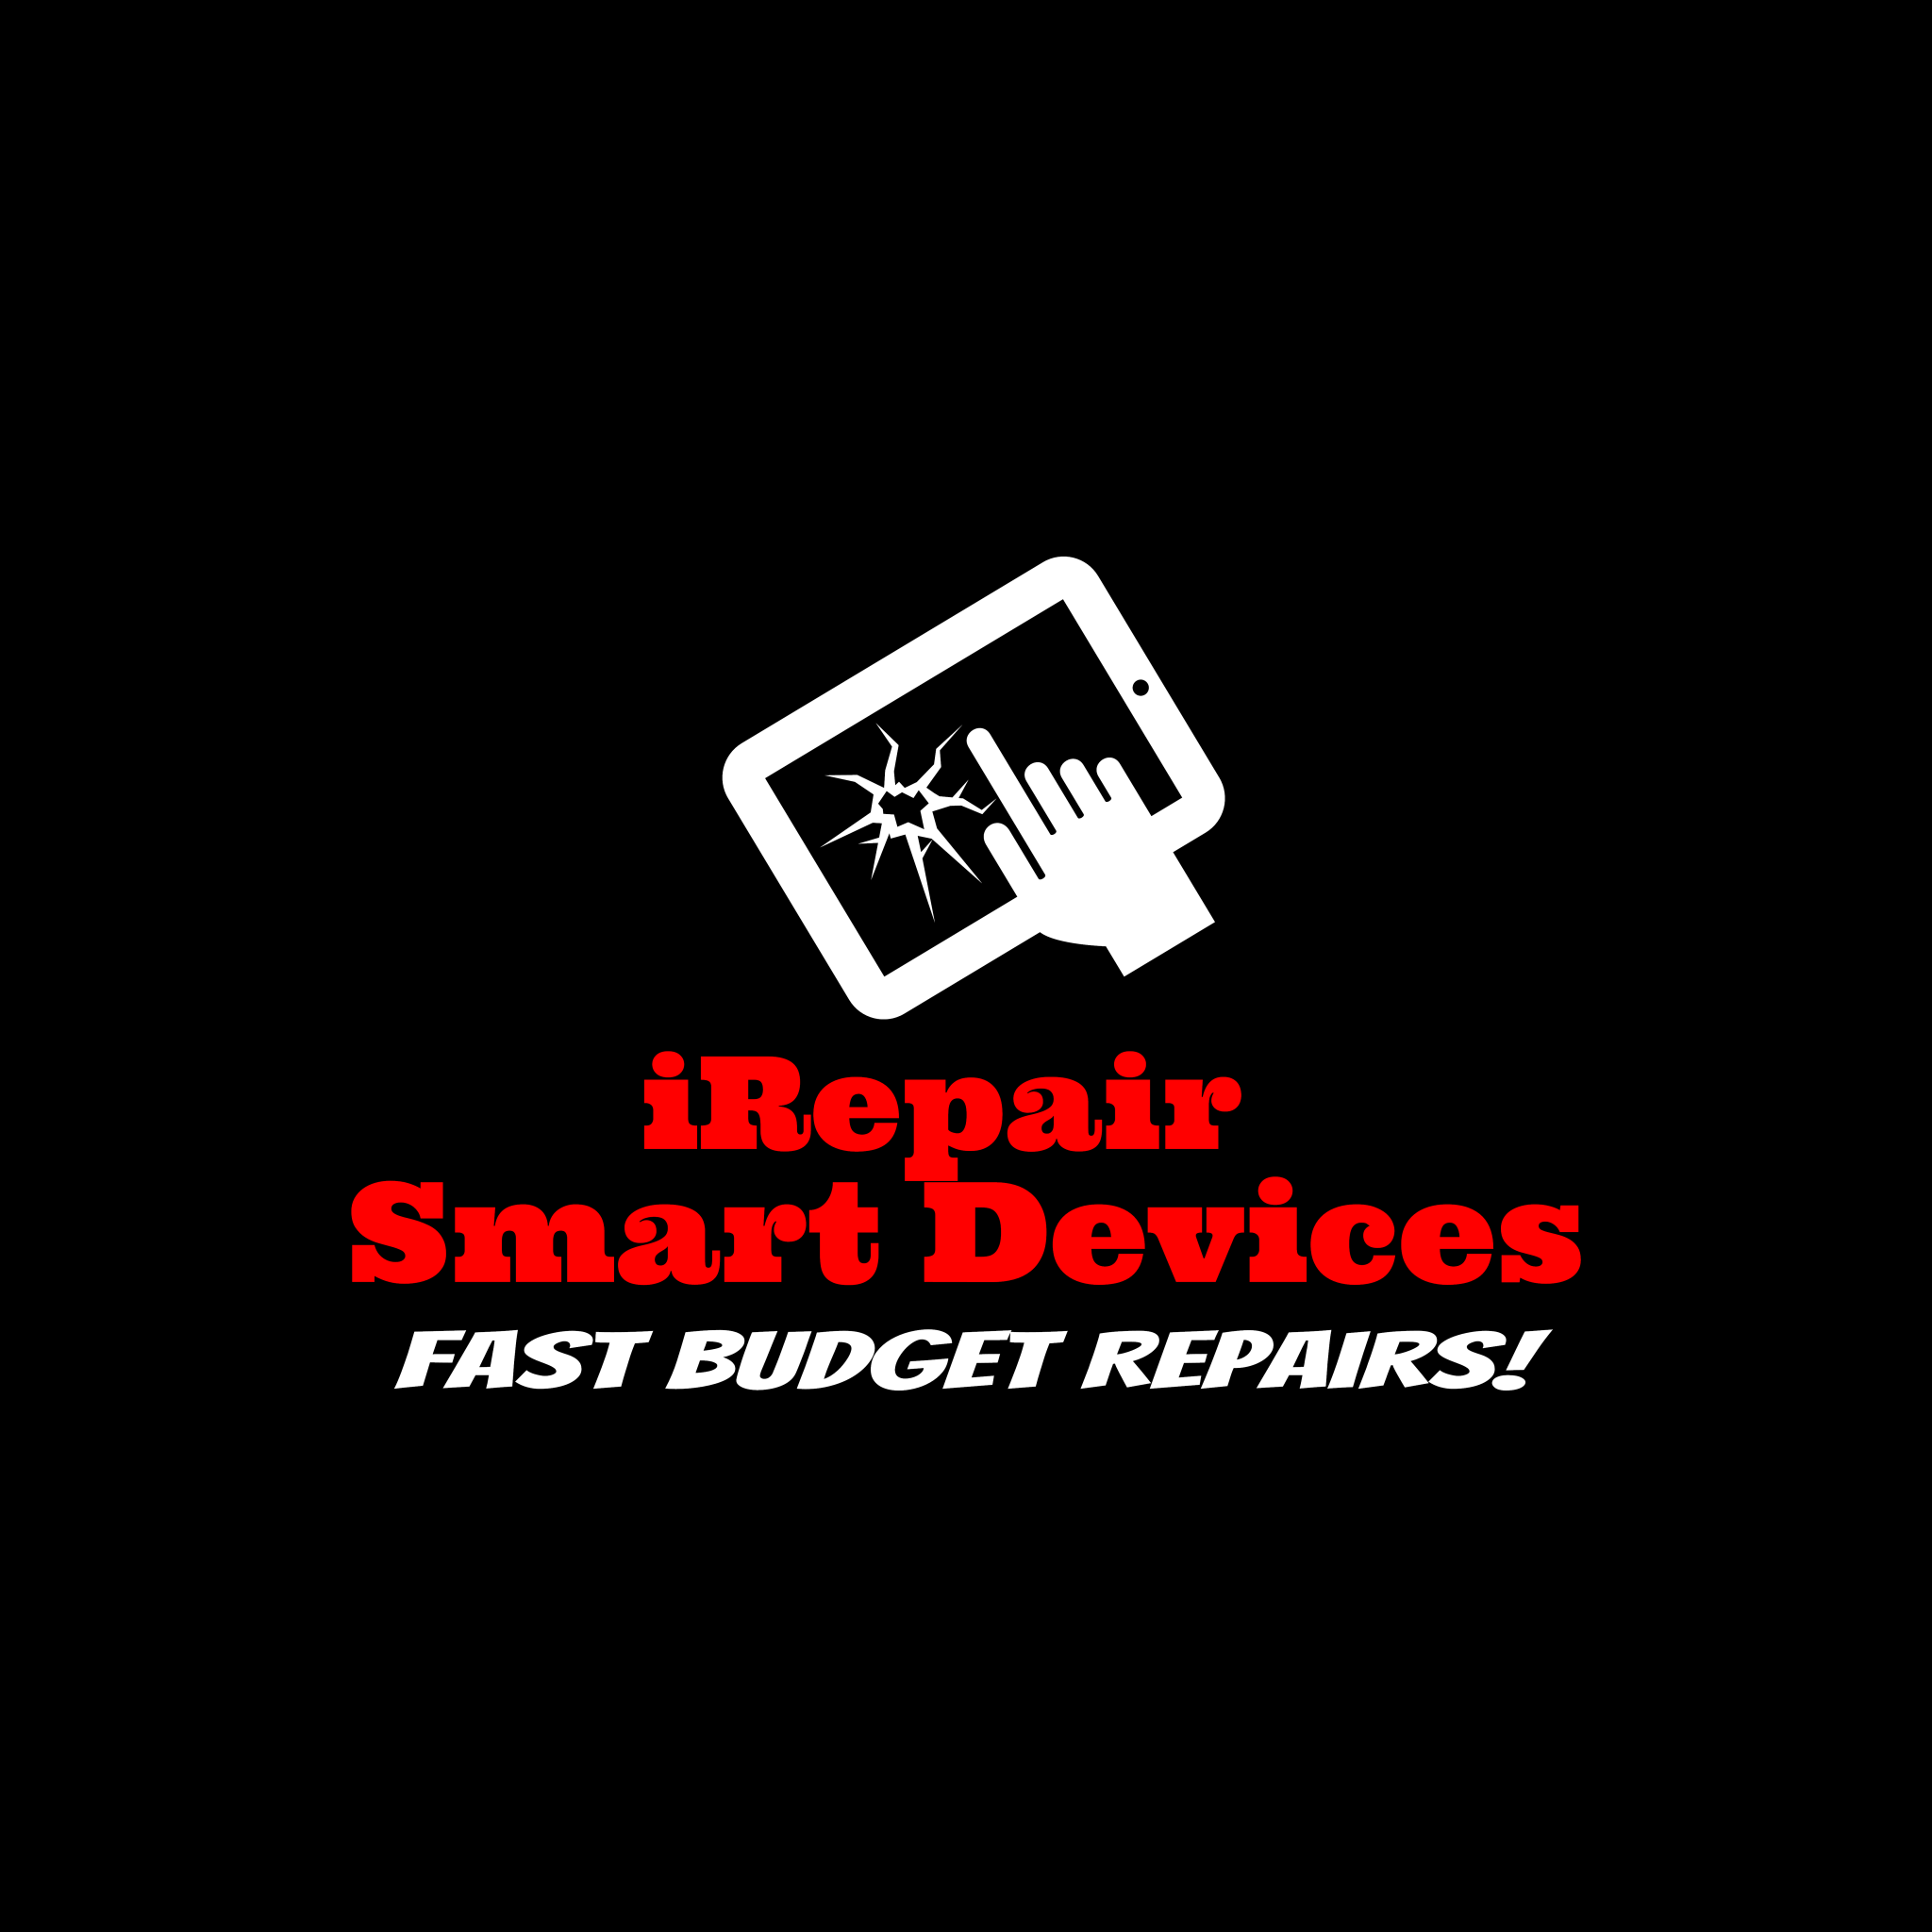 Business logo of iRepair Smart Devices